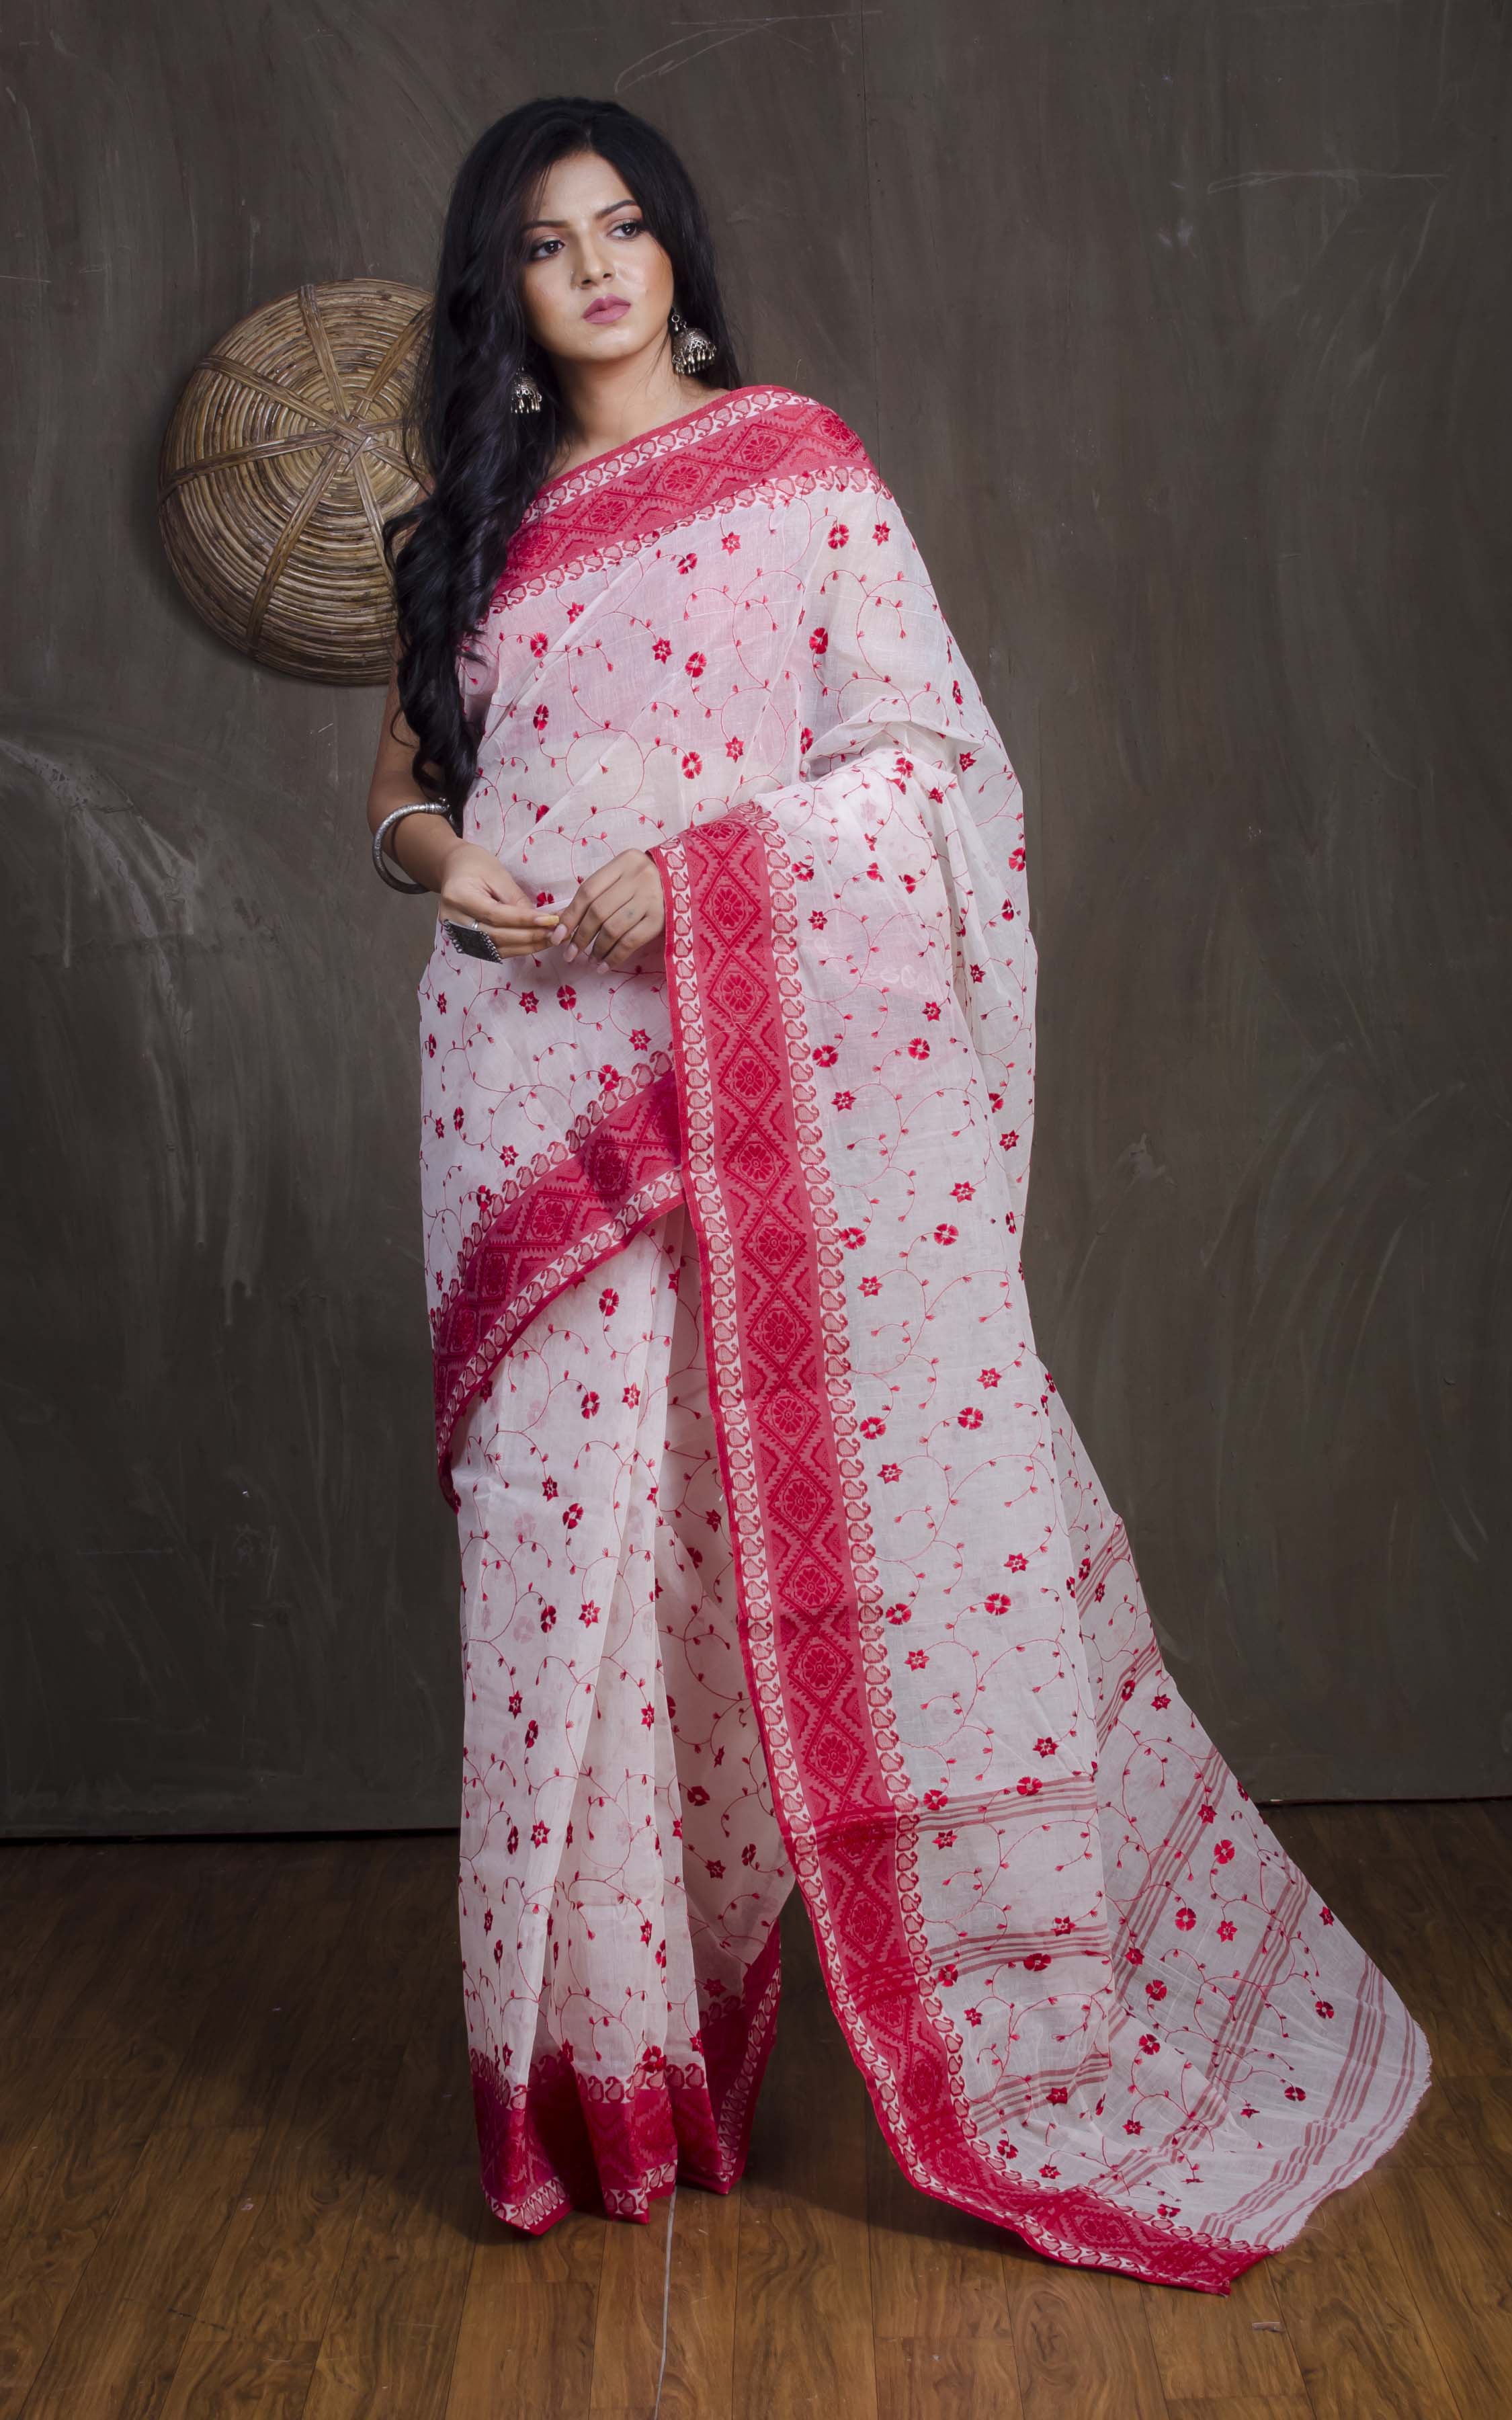 A Bengali Saree Can Make You Look Great On Every Occasion by Socio Genie -  Issuu